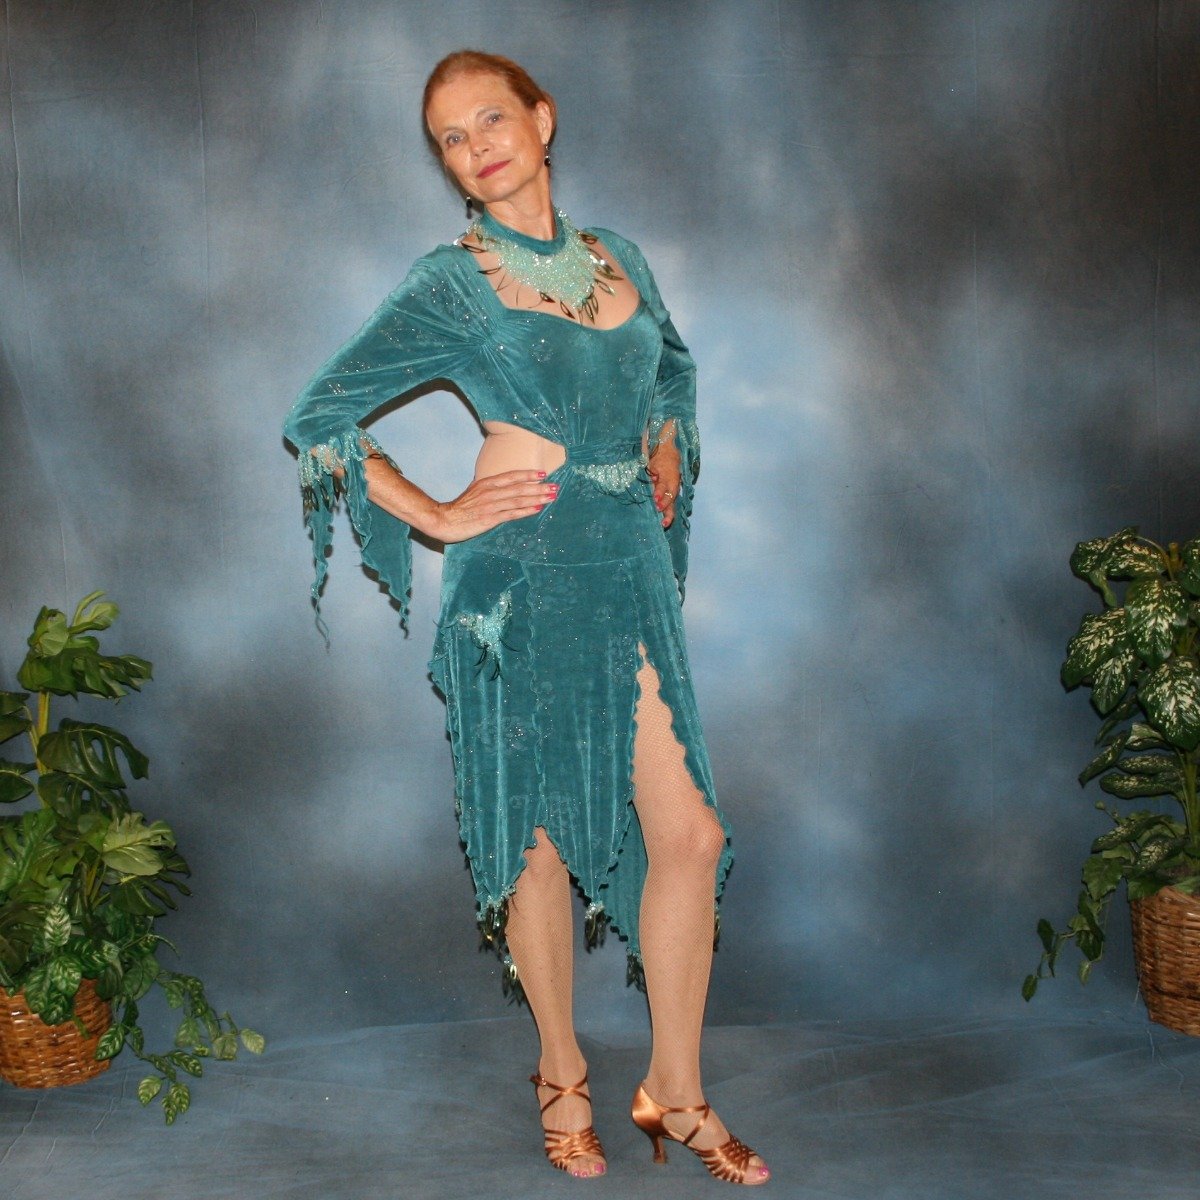 Crystal's Creations side view of Teal Latin/rhythm dress was created in teal glitter slinky with a subtle gold glitter floral print, embellished with light teal faceted round lucite beading & teal spangles, includes a matching neckpiece.